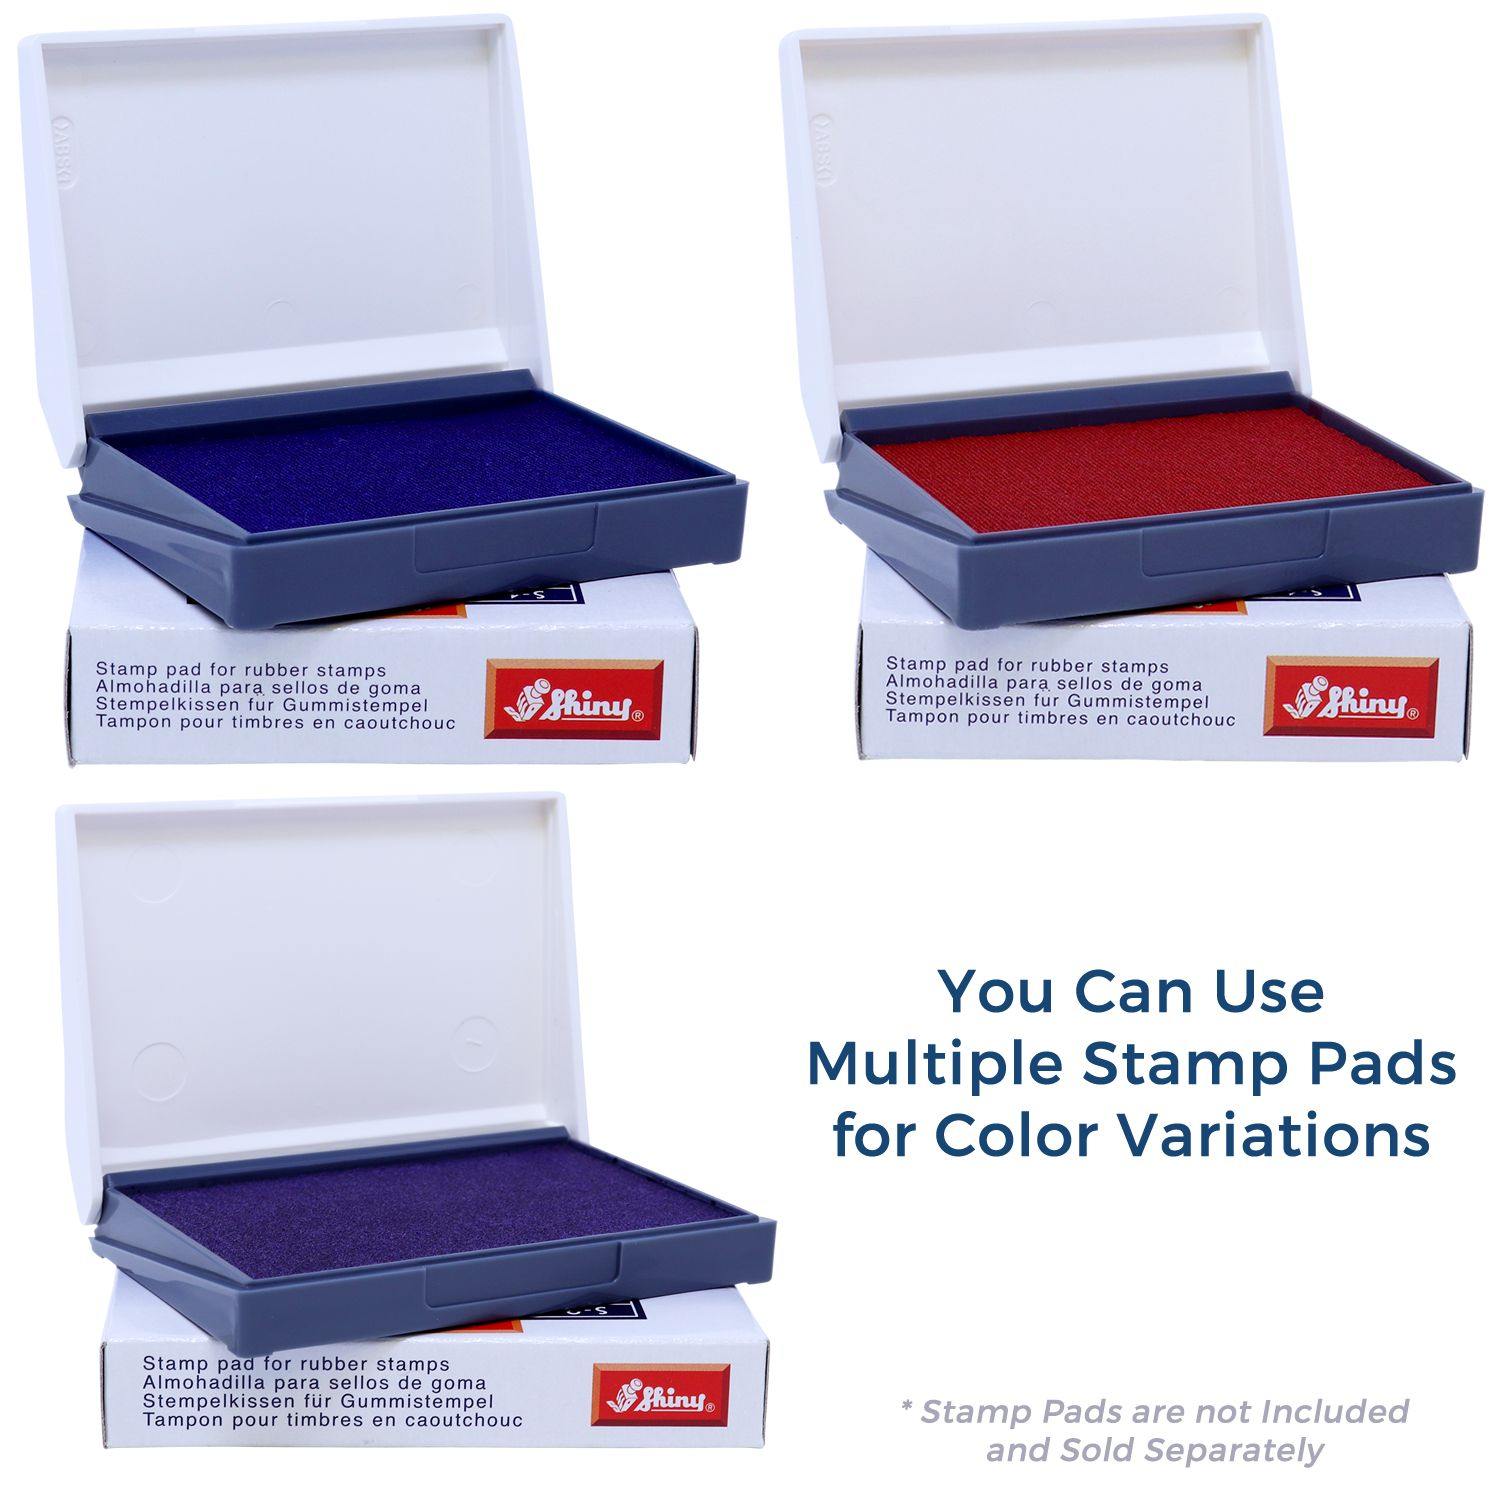 Stamp Pads for Bold Priority Rubber Stamp Available